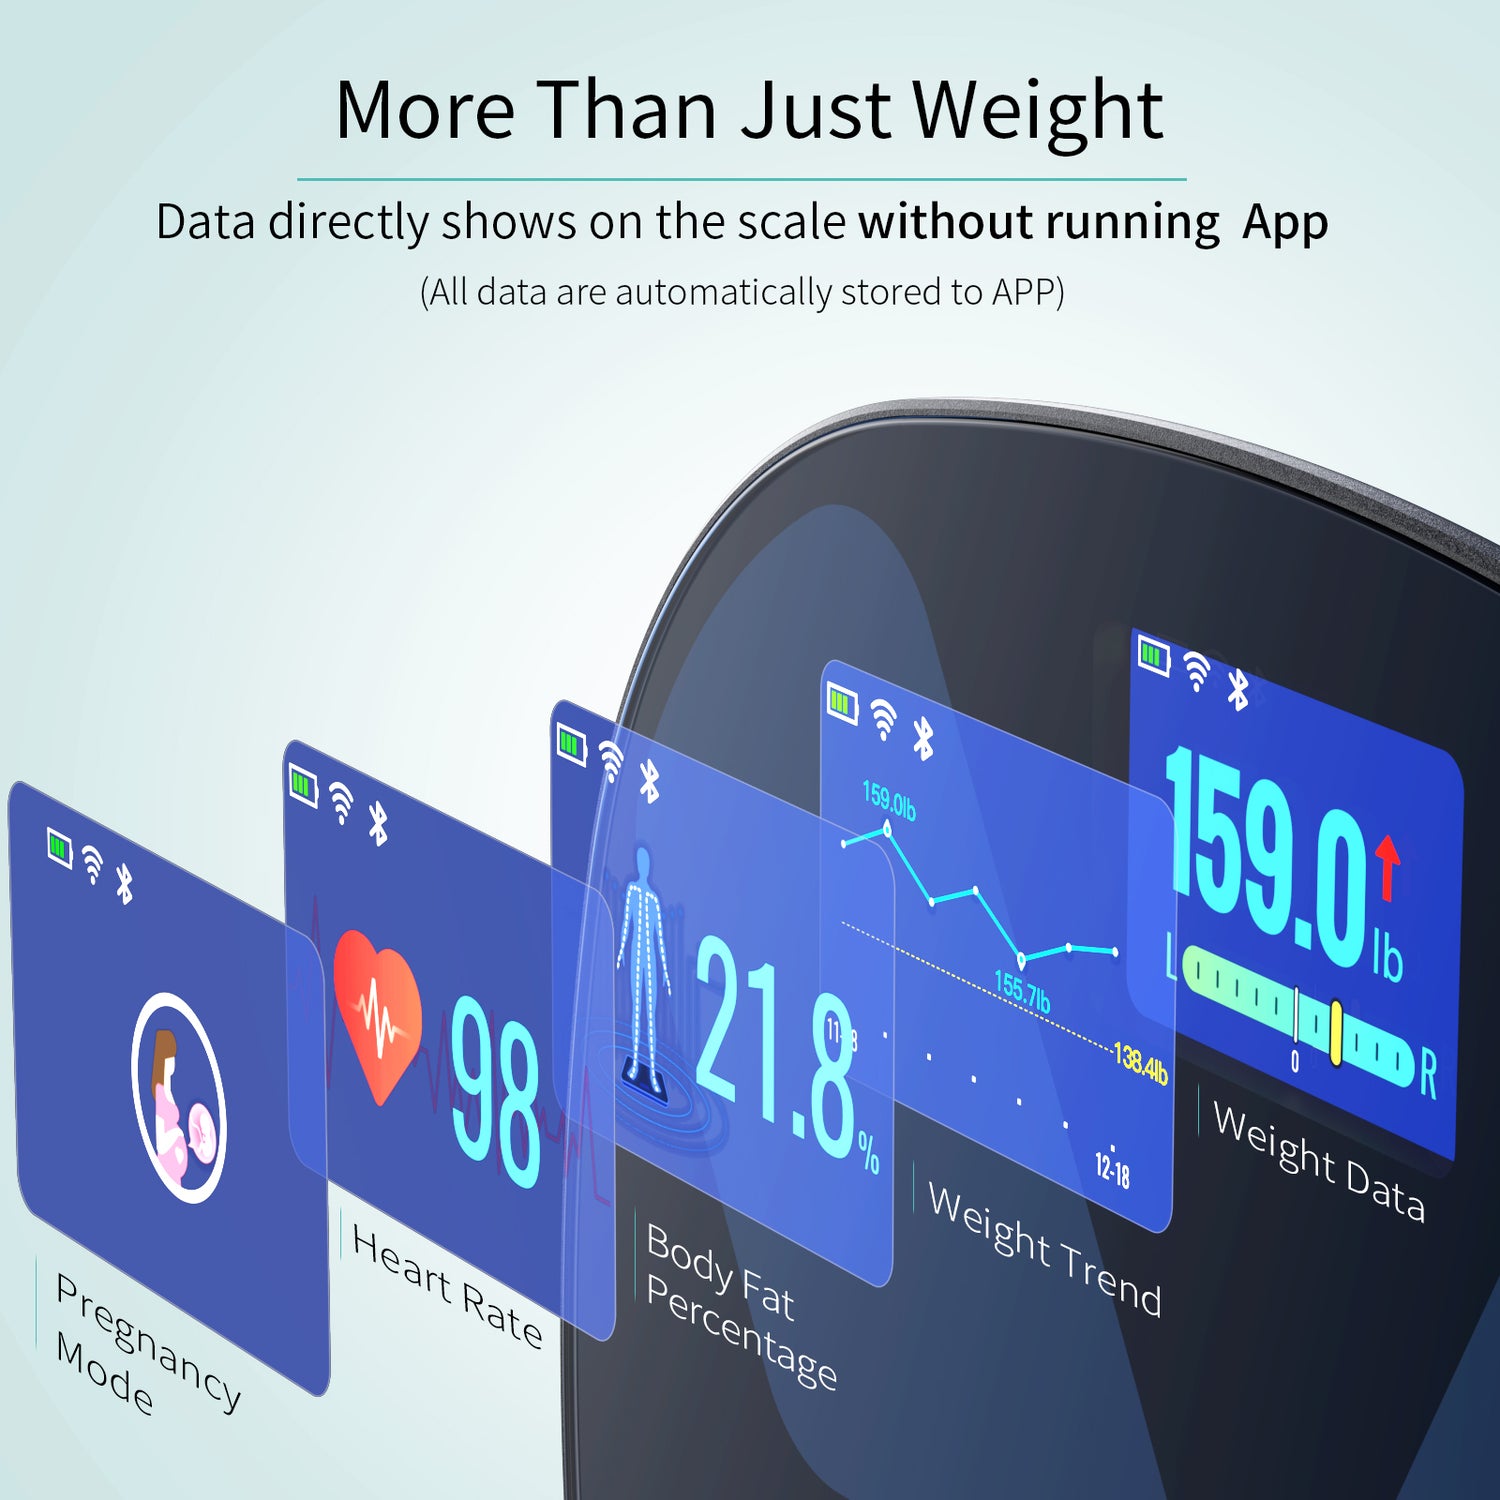 Slimpal Scale for Body Weight, Body Fat Scale Large Display